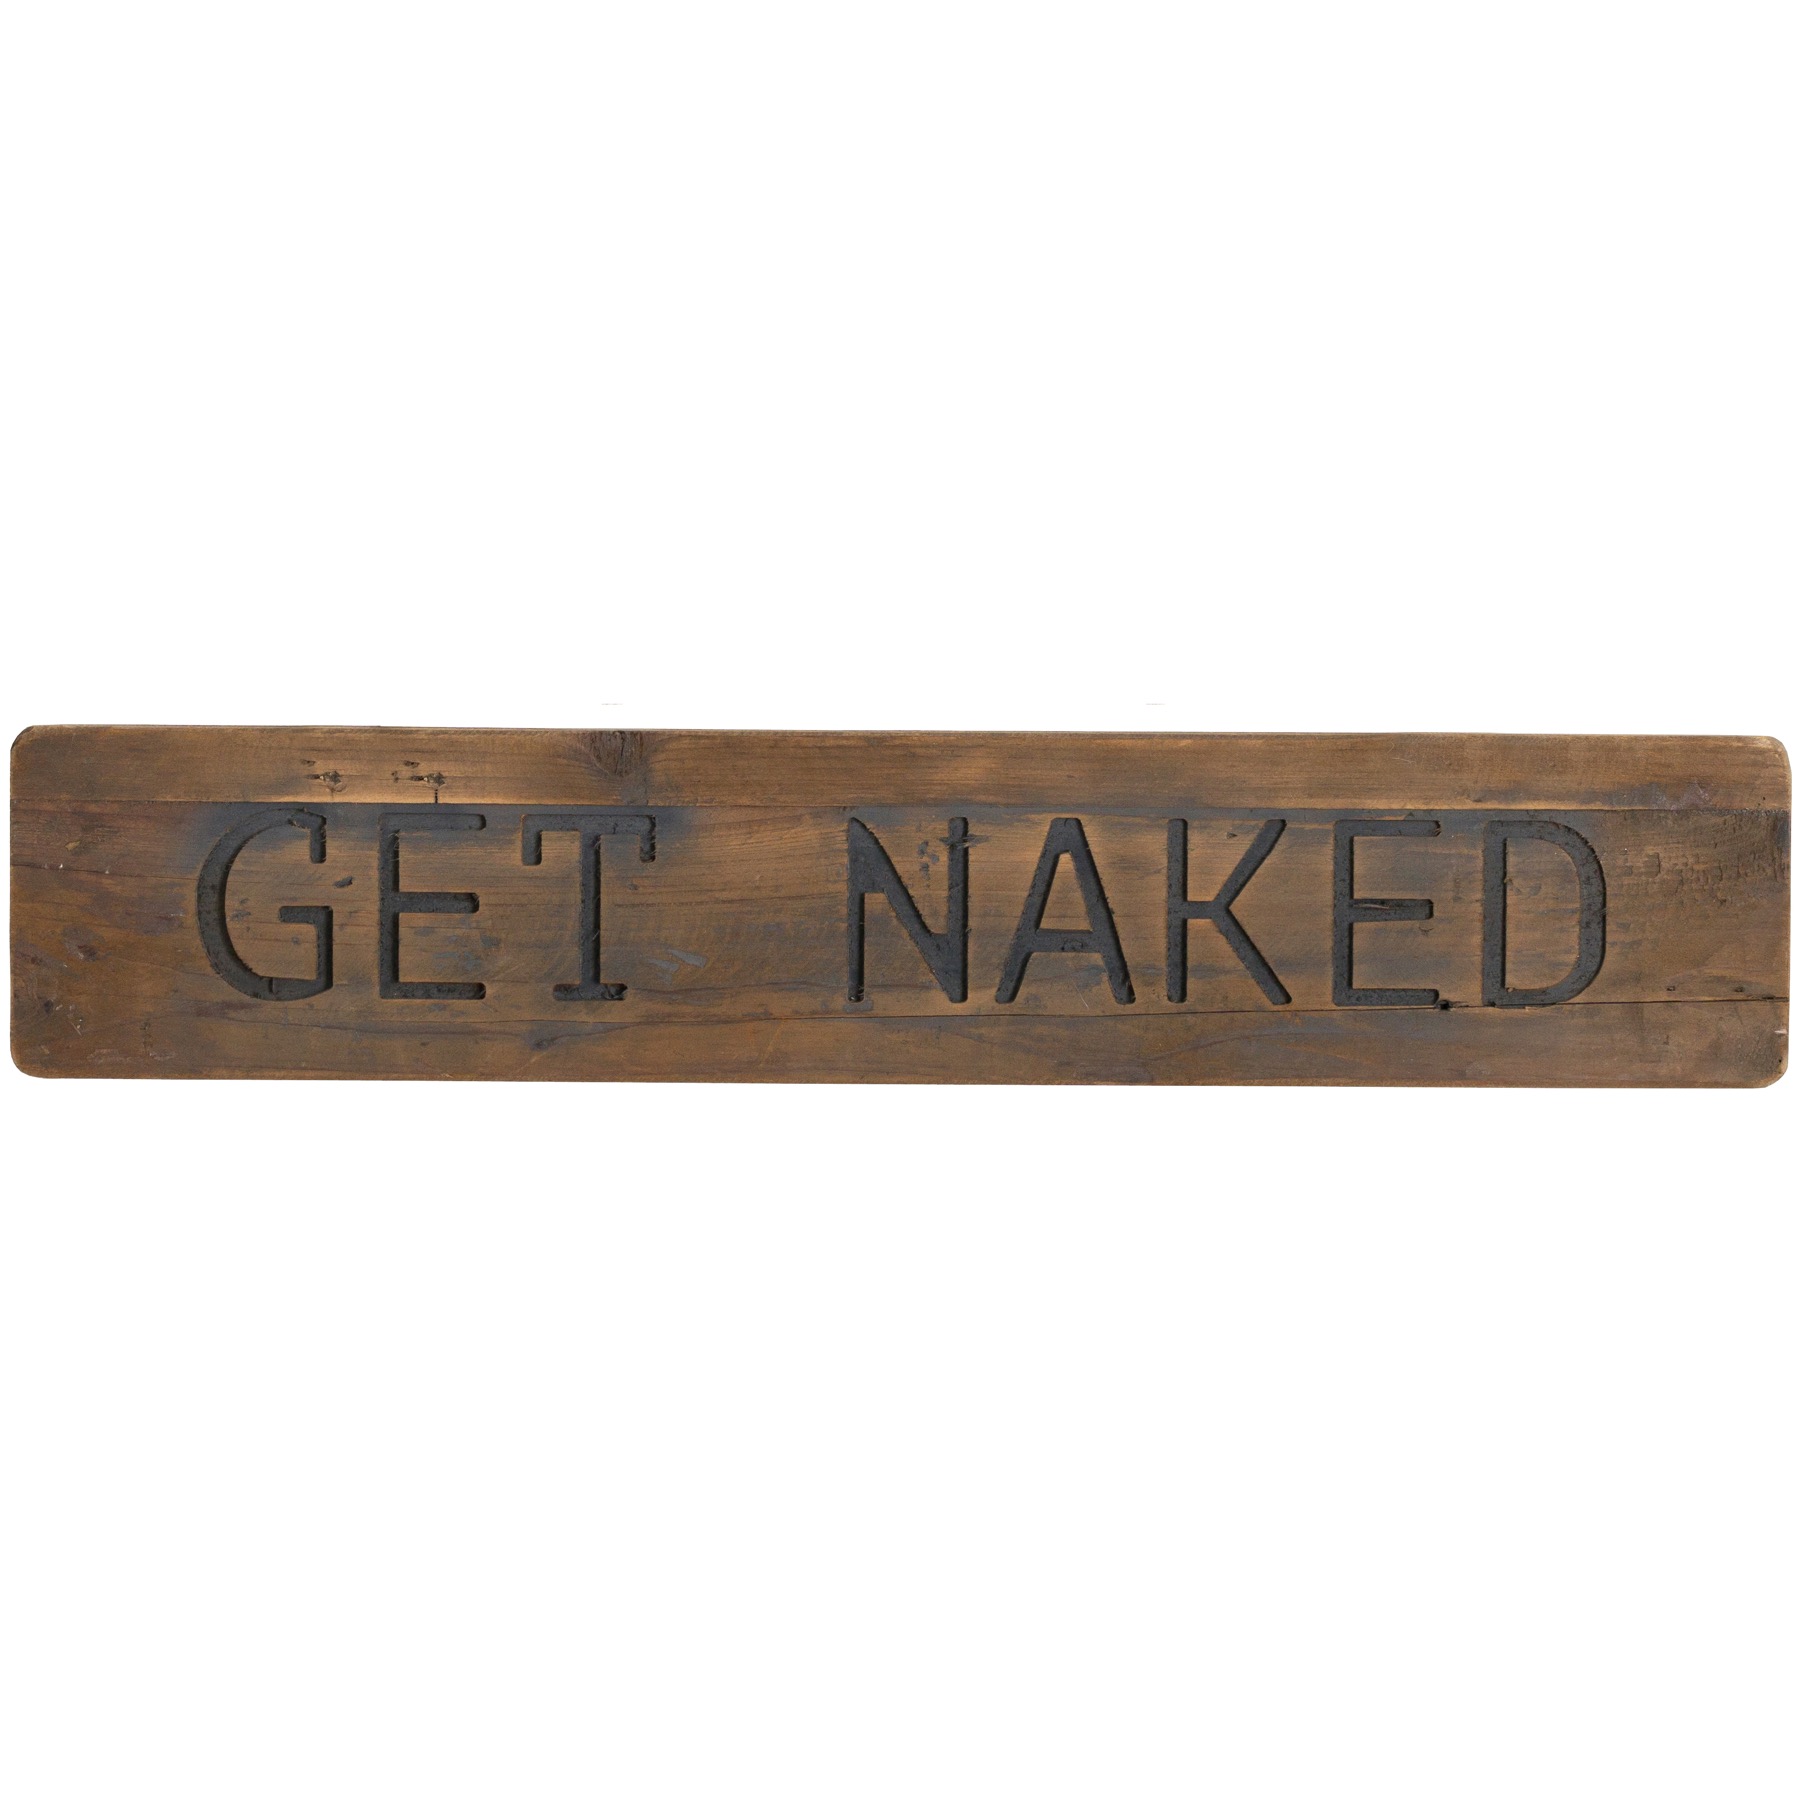 Get Naked Rustic Wooden Message Plaque - Image 1